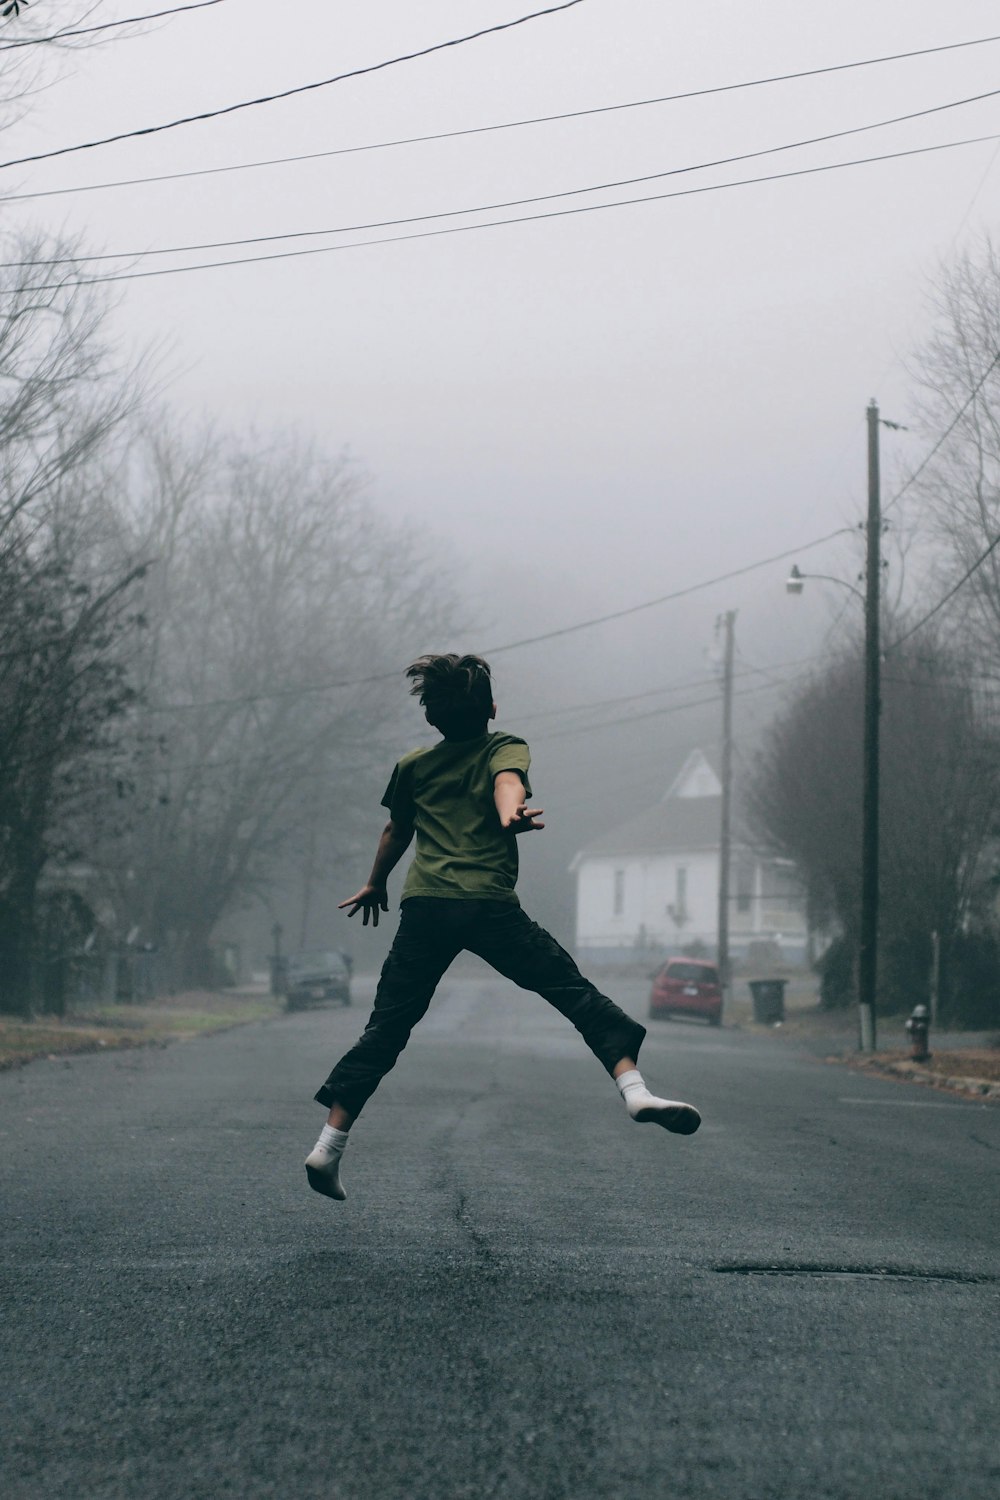 Kid jumps in the middle of the road on a foggy day